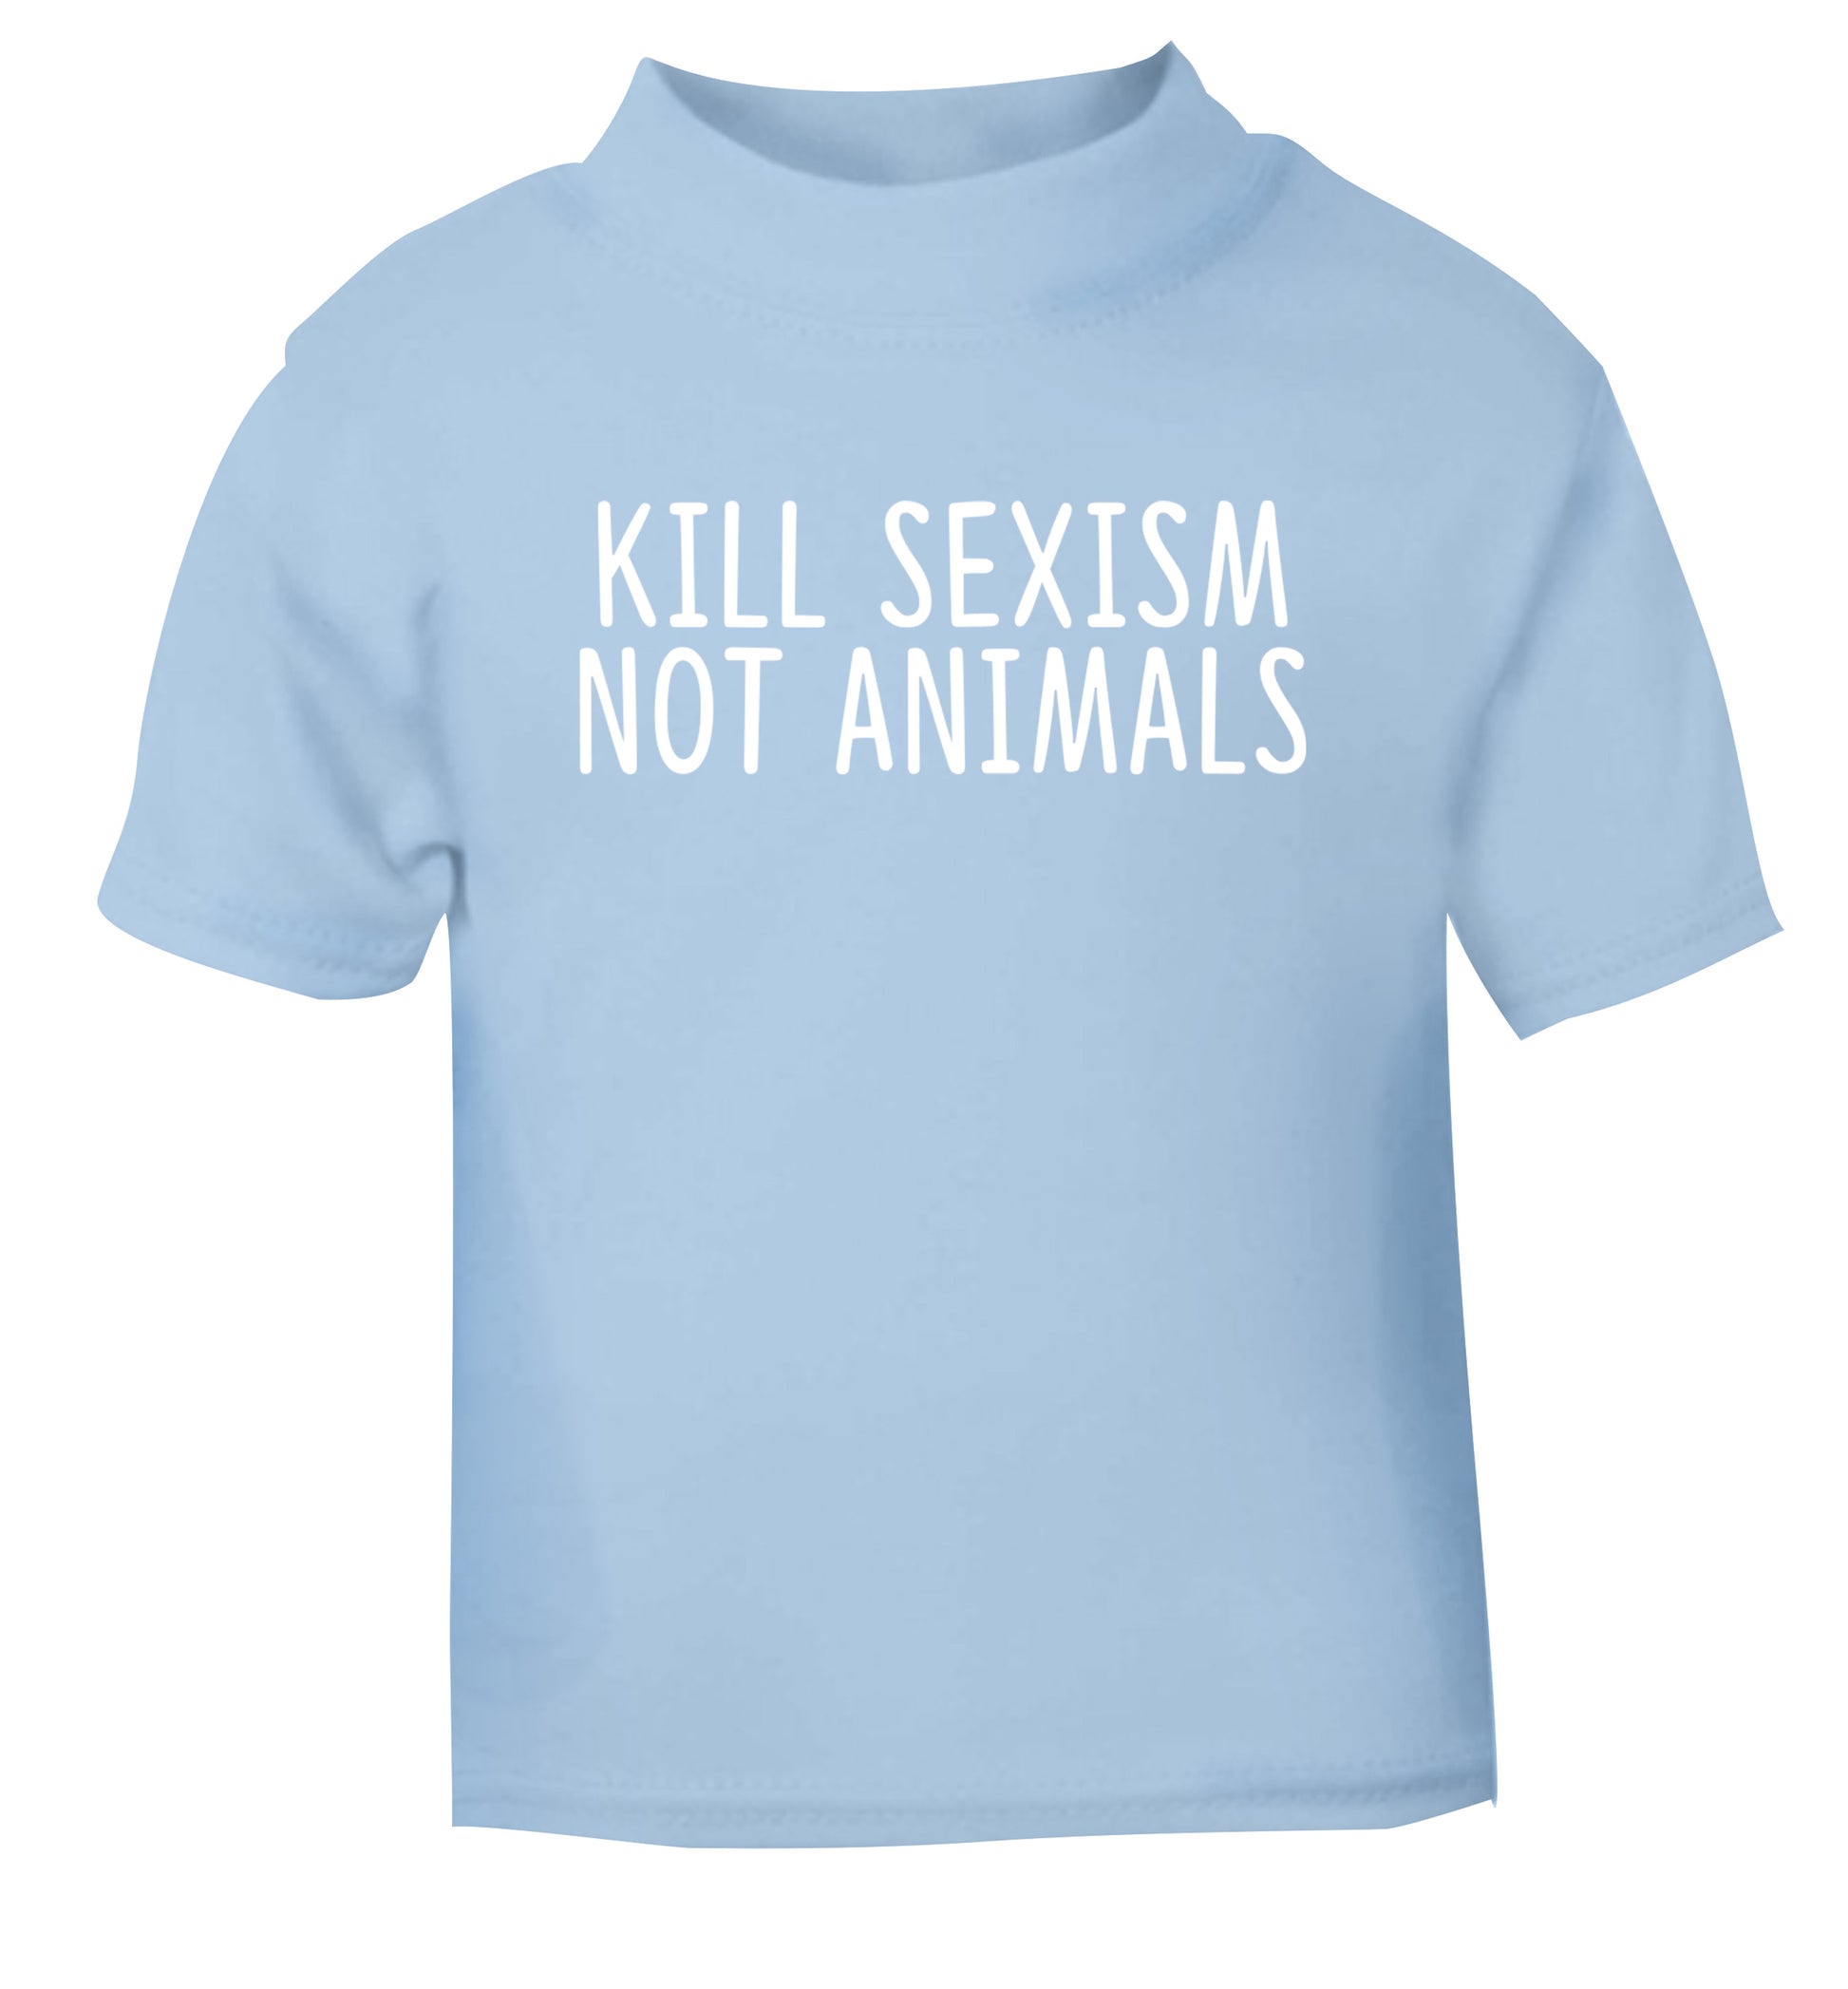 Kill Sexism Not Animals light blue Baby Toddler Tshirt 2 Years